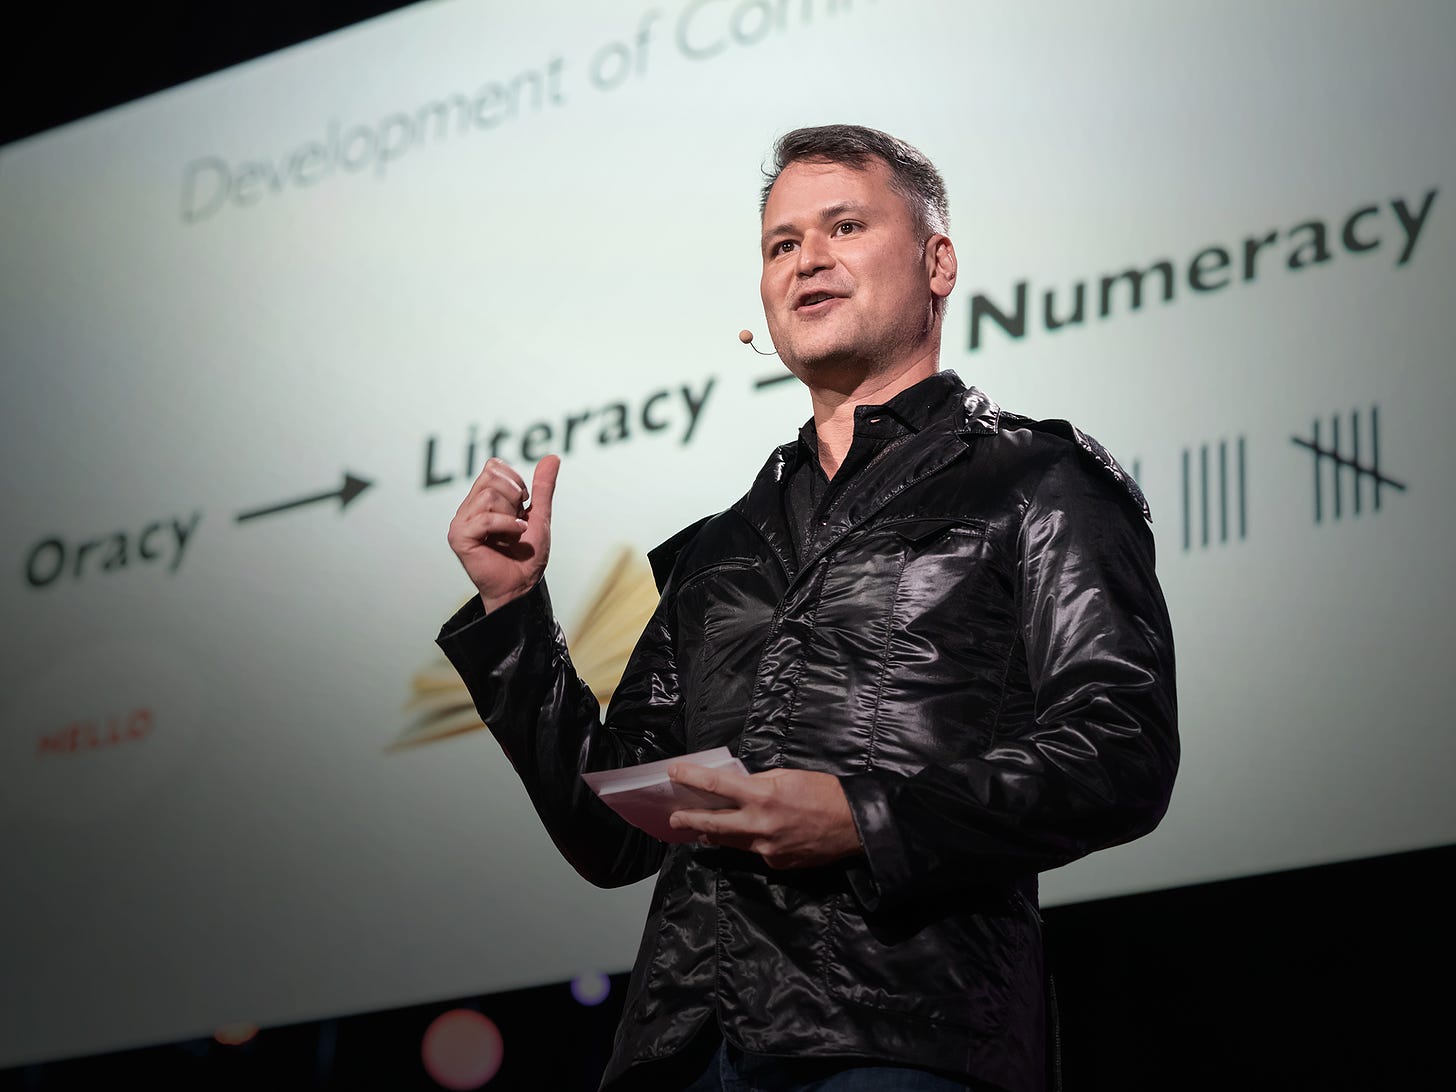 Tommy McCall: The simple genius of a good graphic | TED Talk